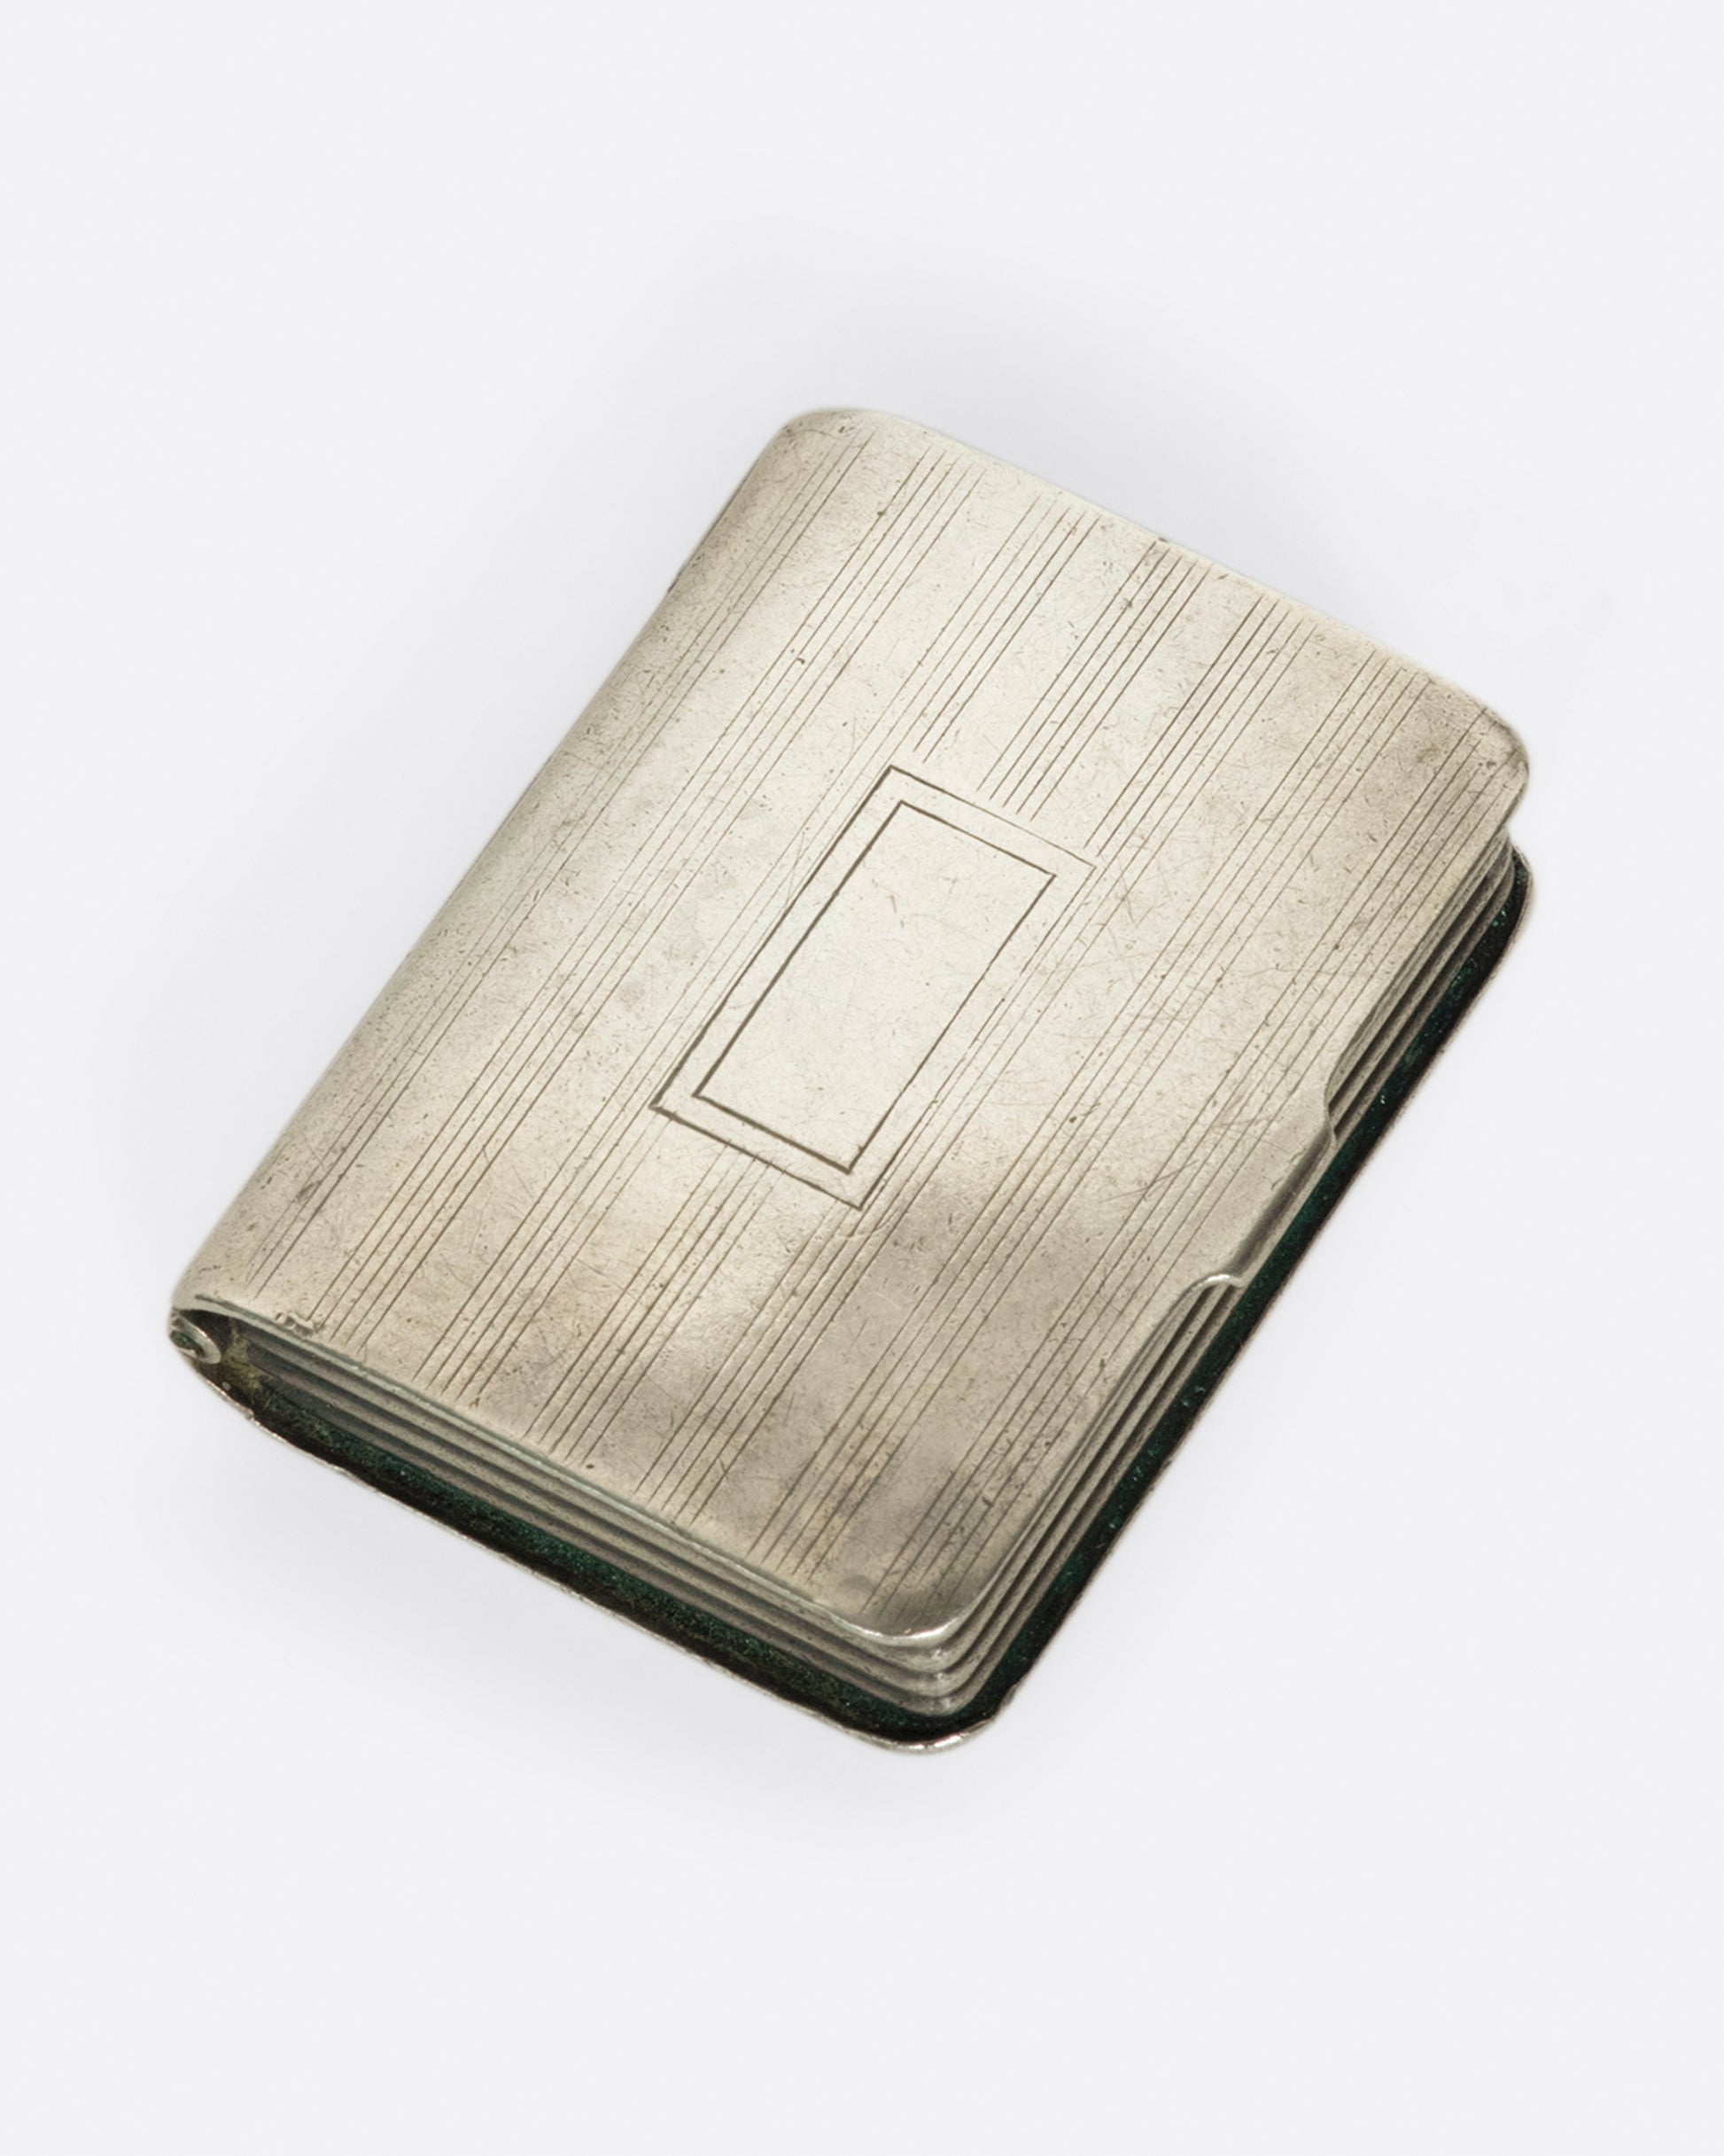 An intriguing sterling silver pill box, crafted to look like a mini book. 